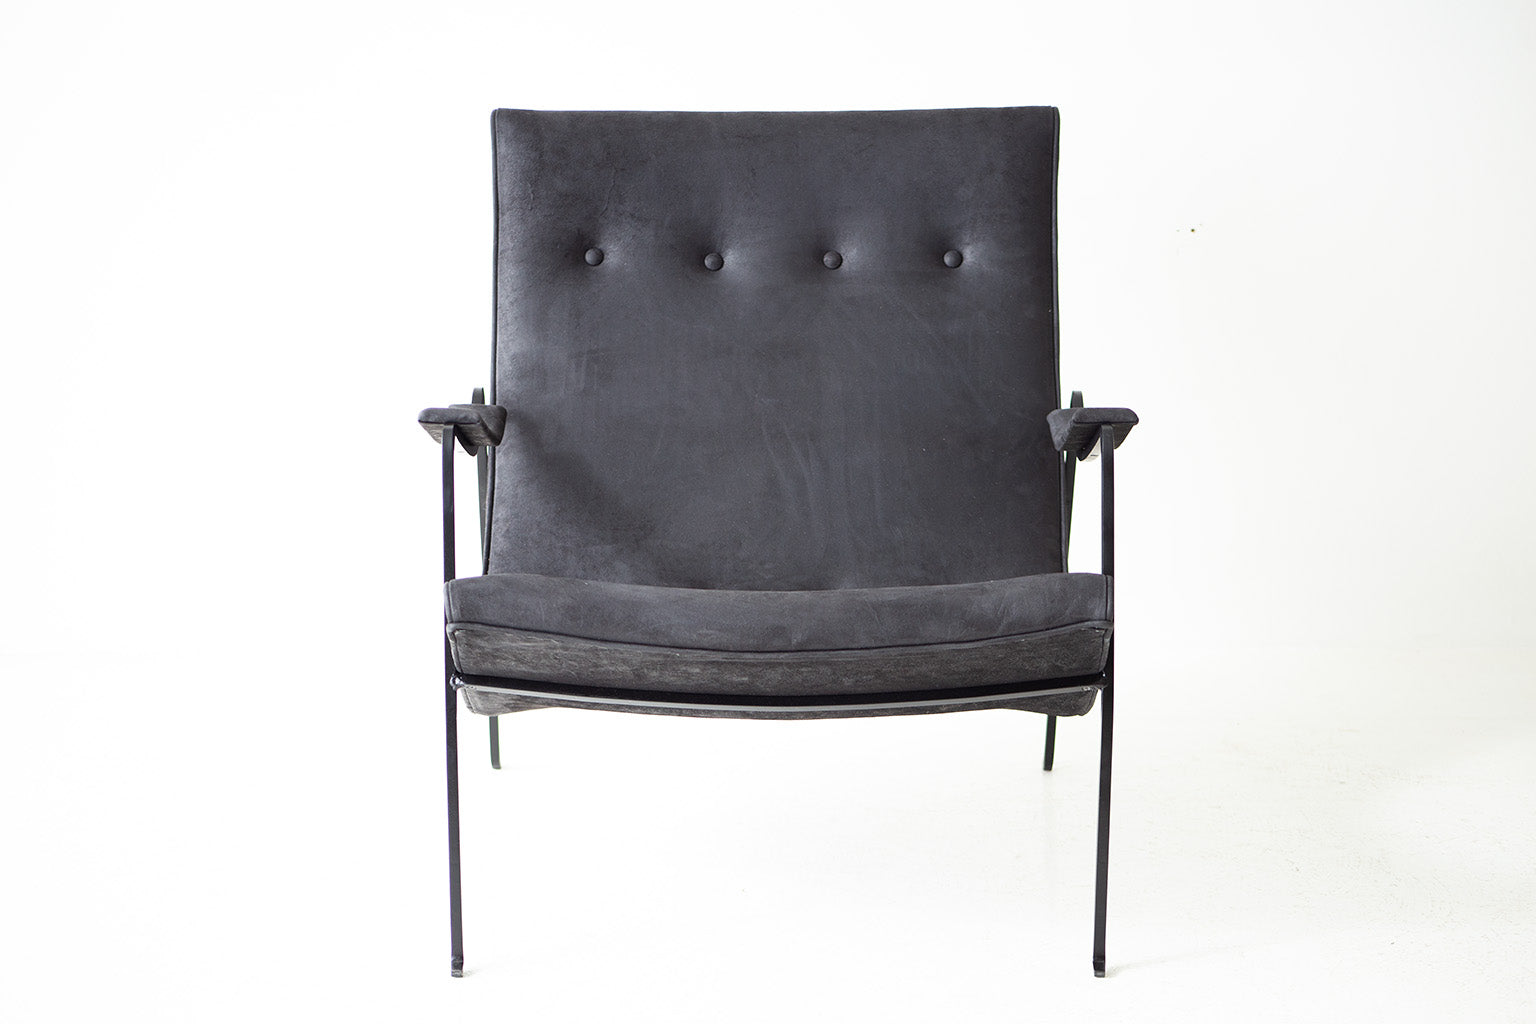 Milo Baughman Iron and Leather Lounge Chair for Thayer Coggin